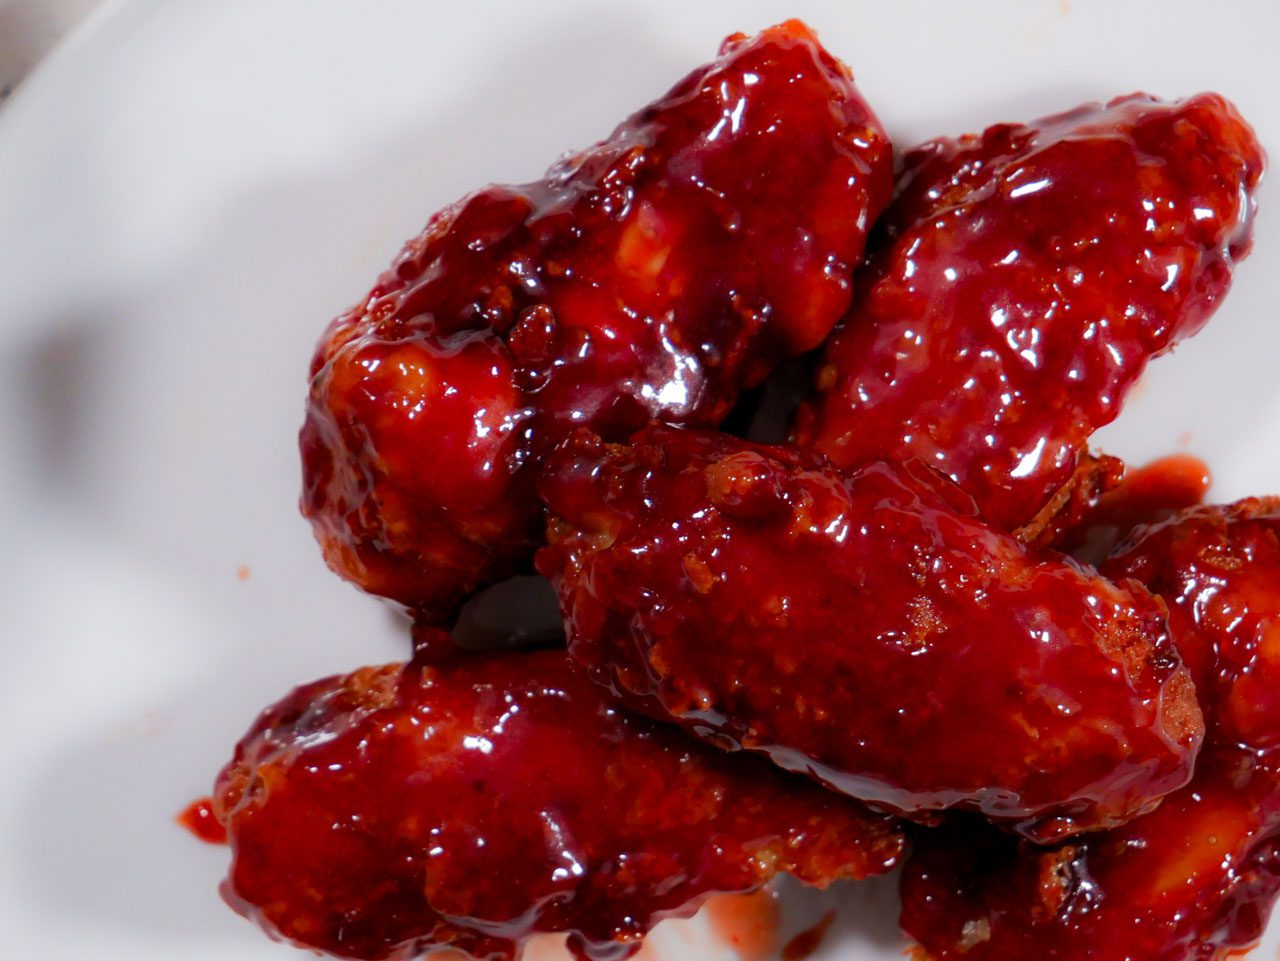 Sticky red sweet sauce on fried chicken wings on a plate